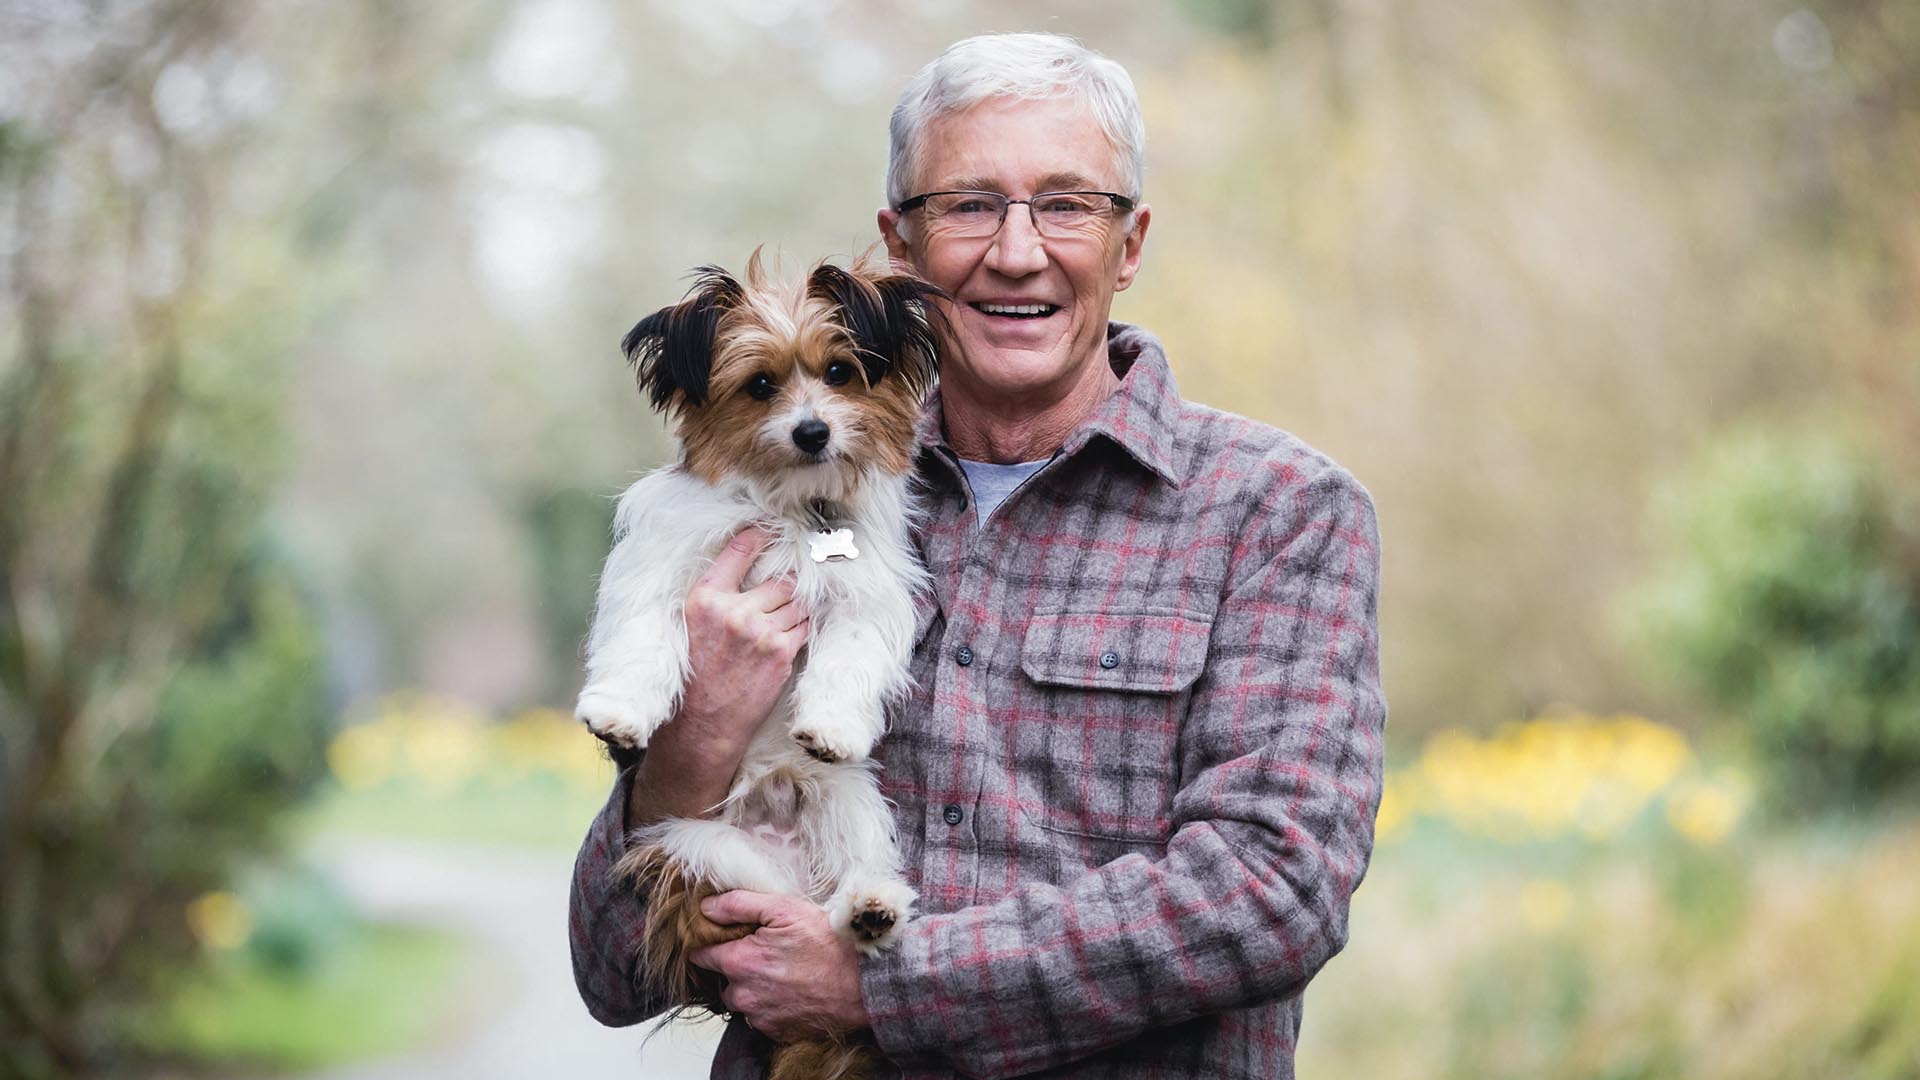 Paul O'Grady spoke to The Big Issue about his love of dogs and mixed feelings on Lily Savage Photo: Kirsty Mattsson